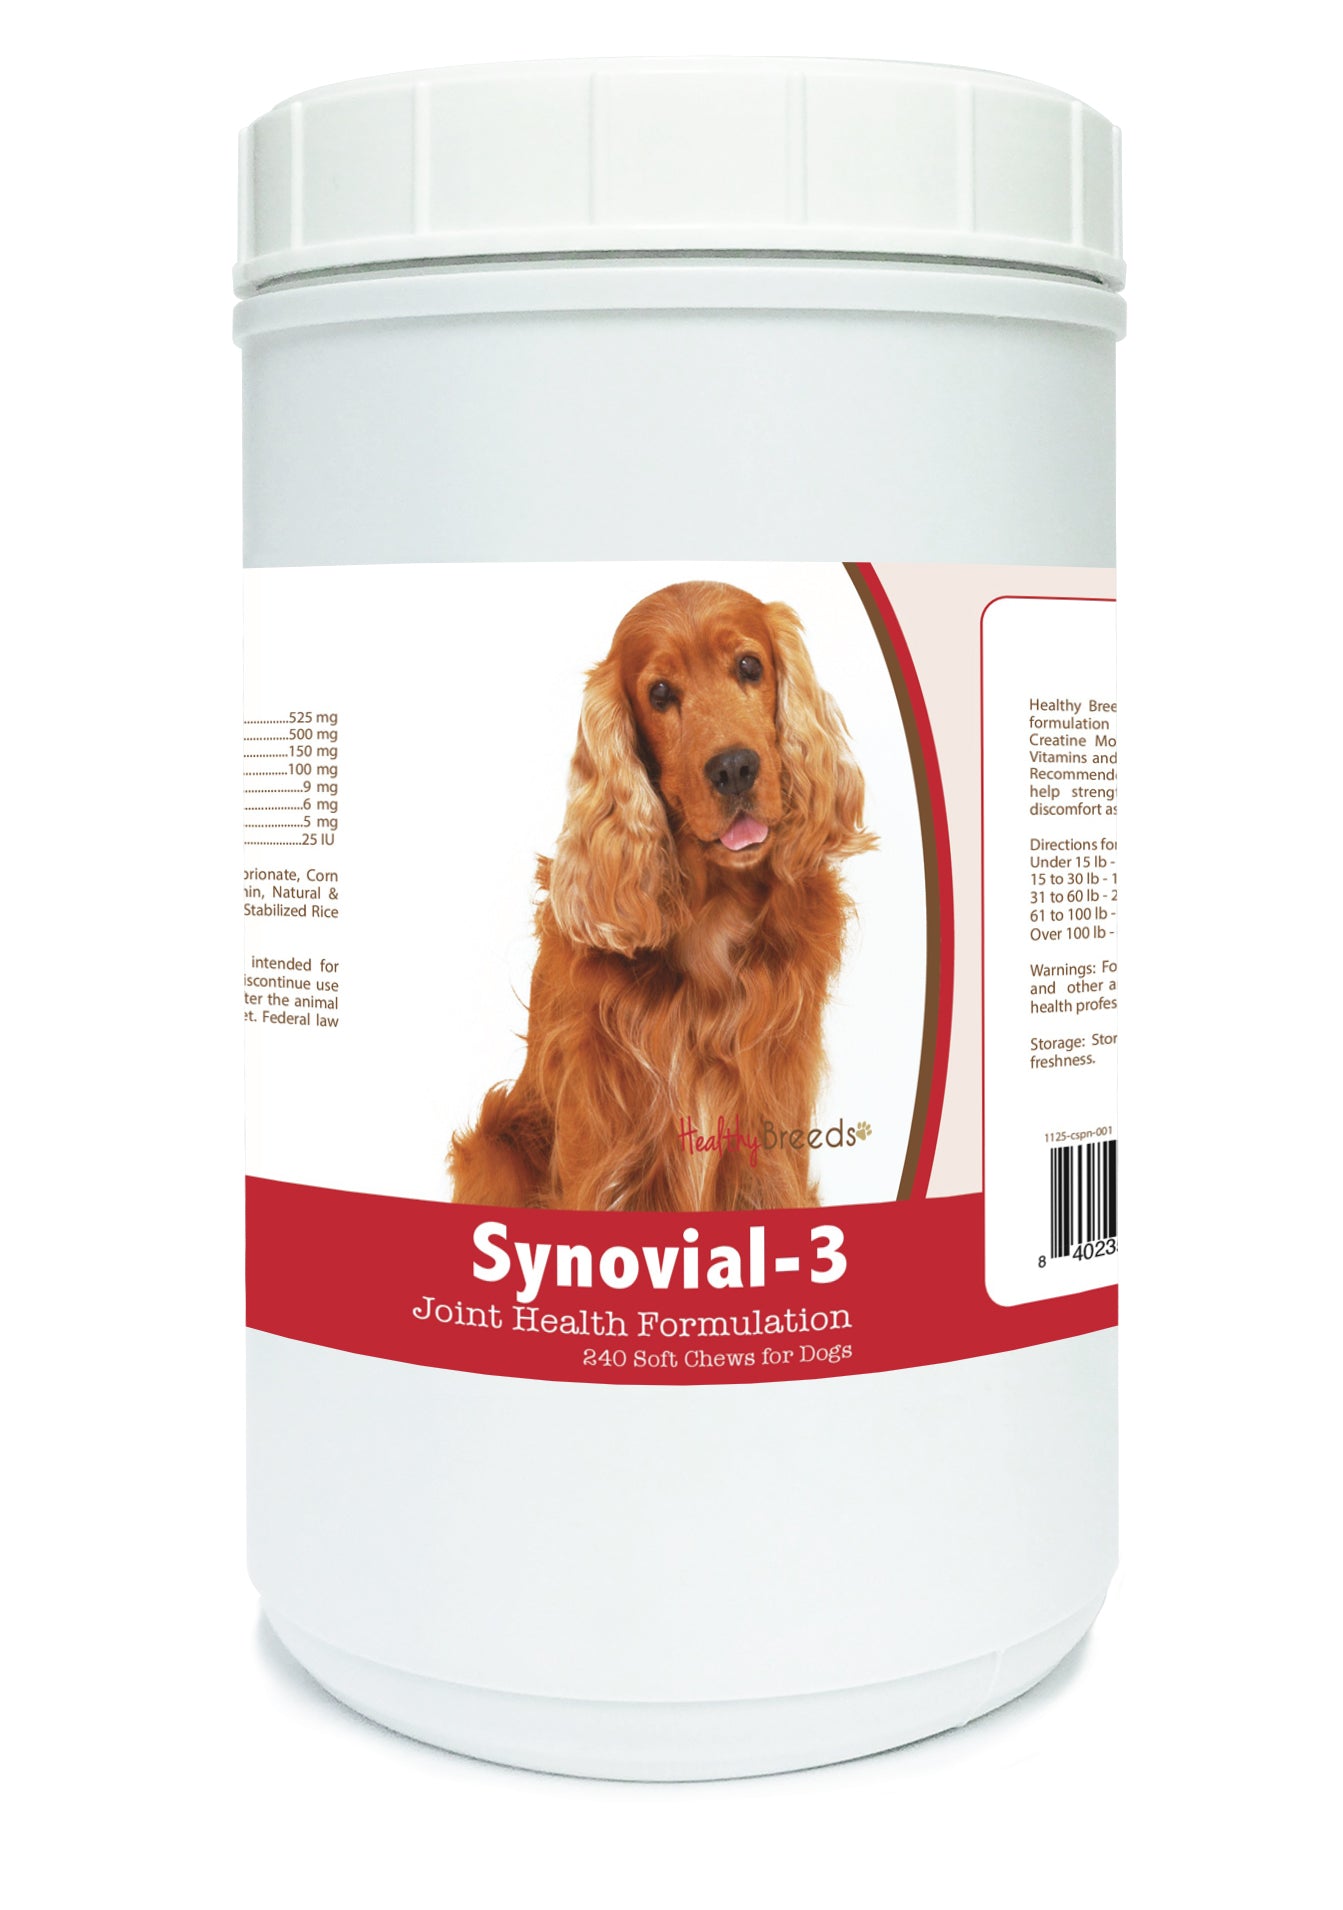 Cocker Spaniel Synovial-3 Joint Health Formulation Soft Chews 240 Count